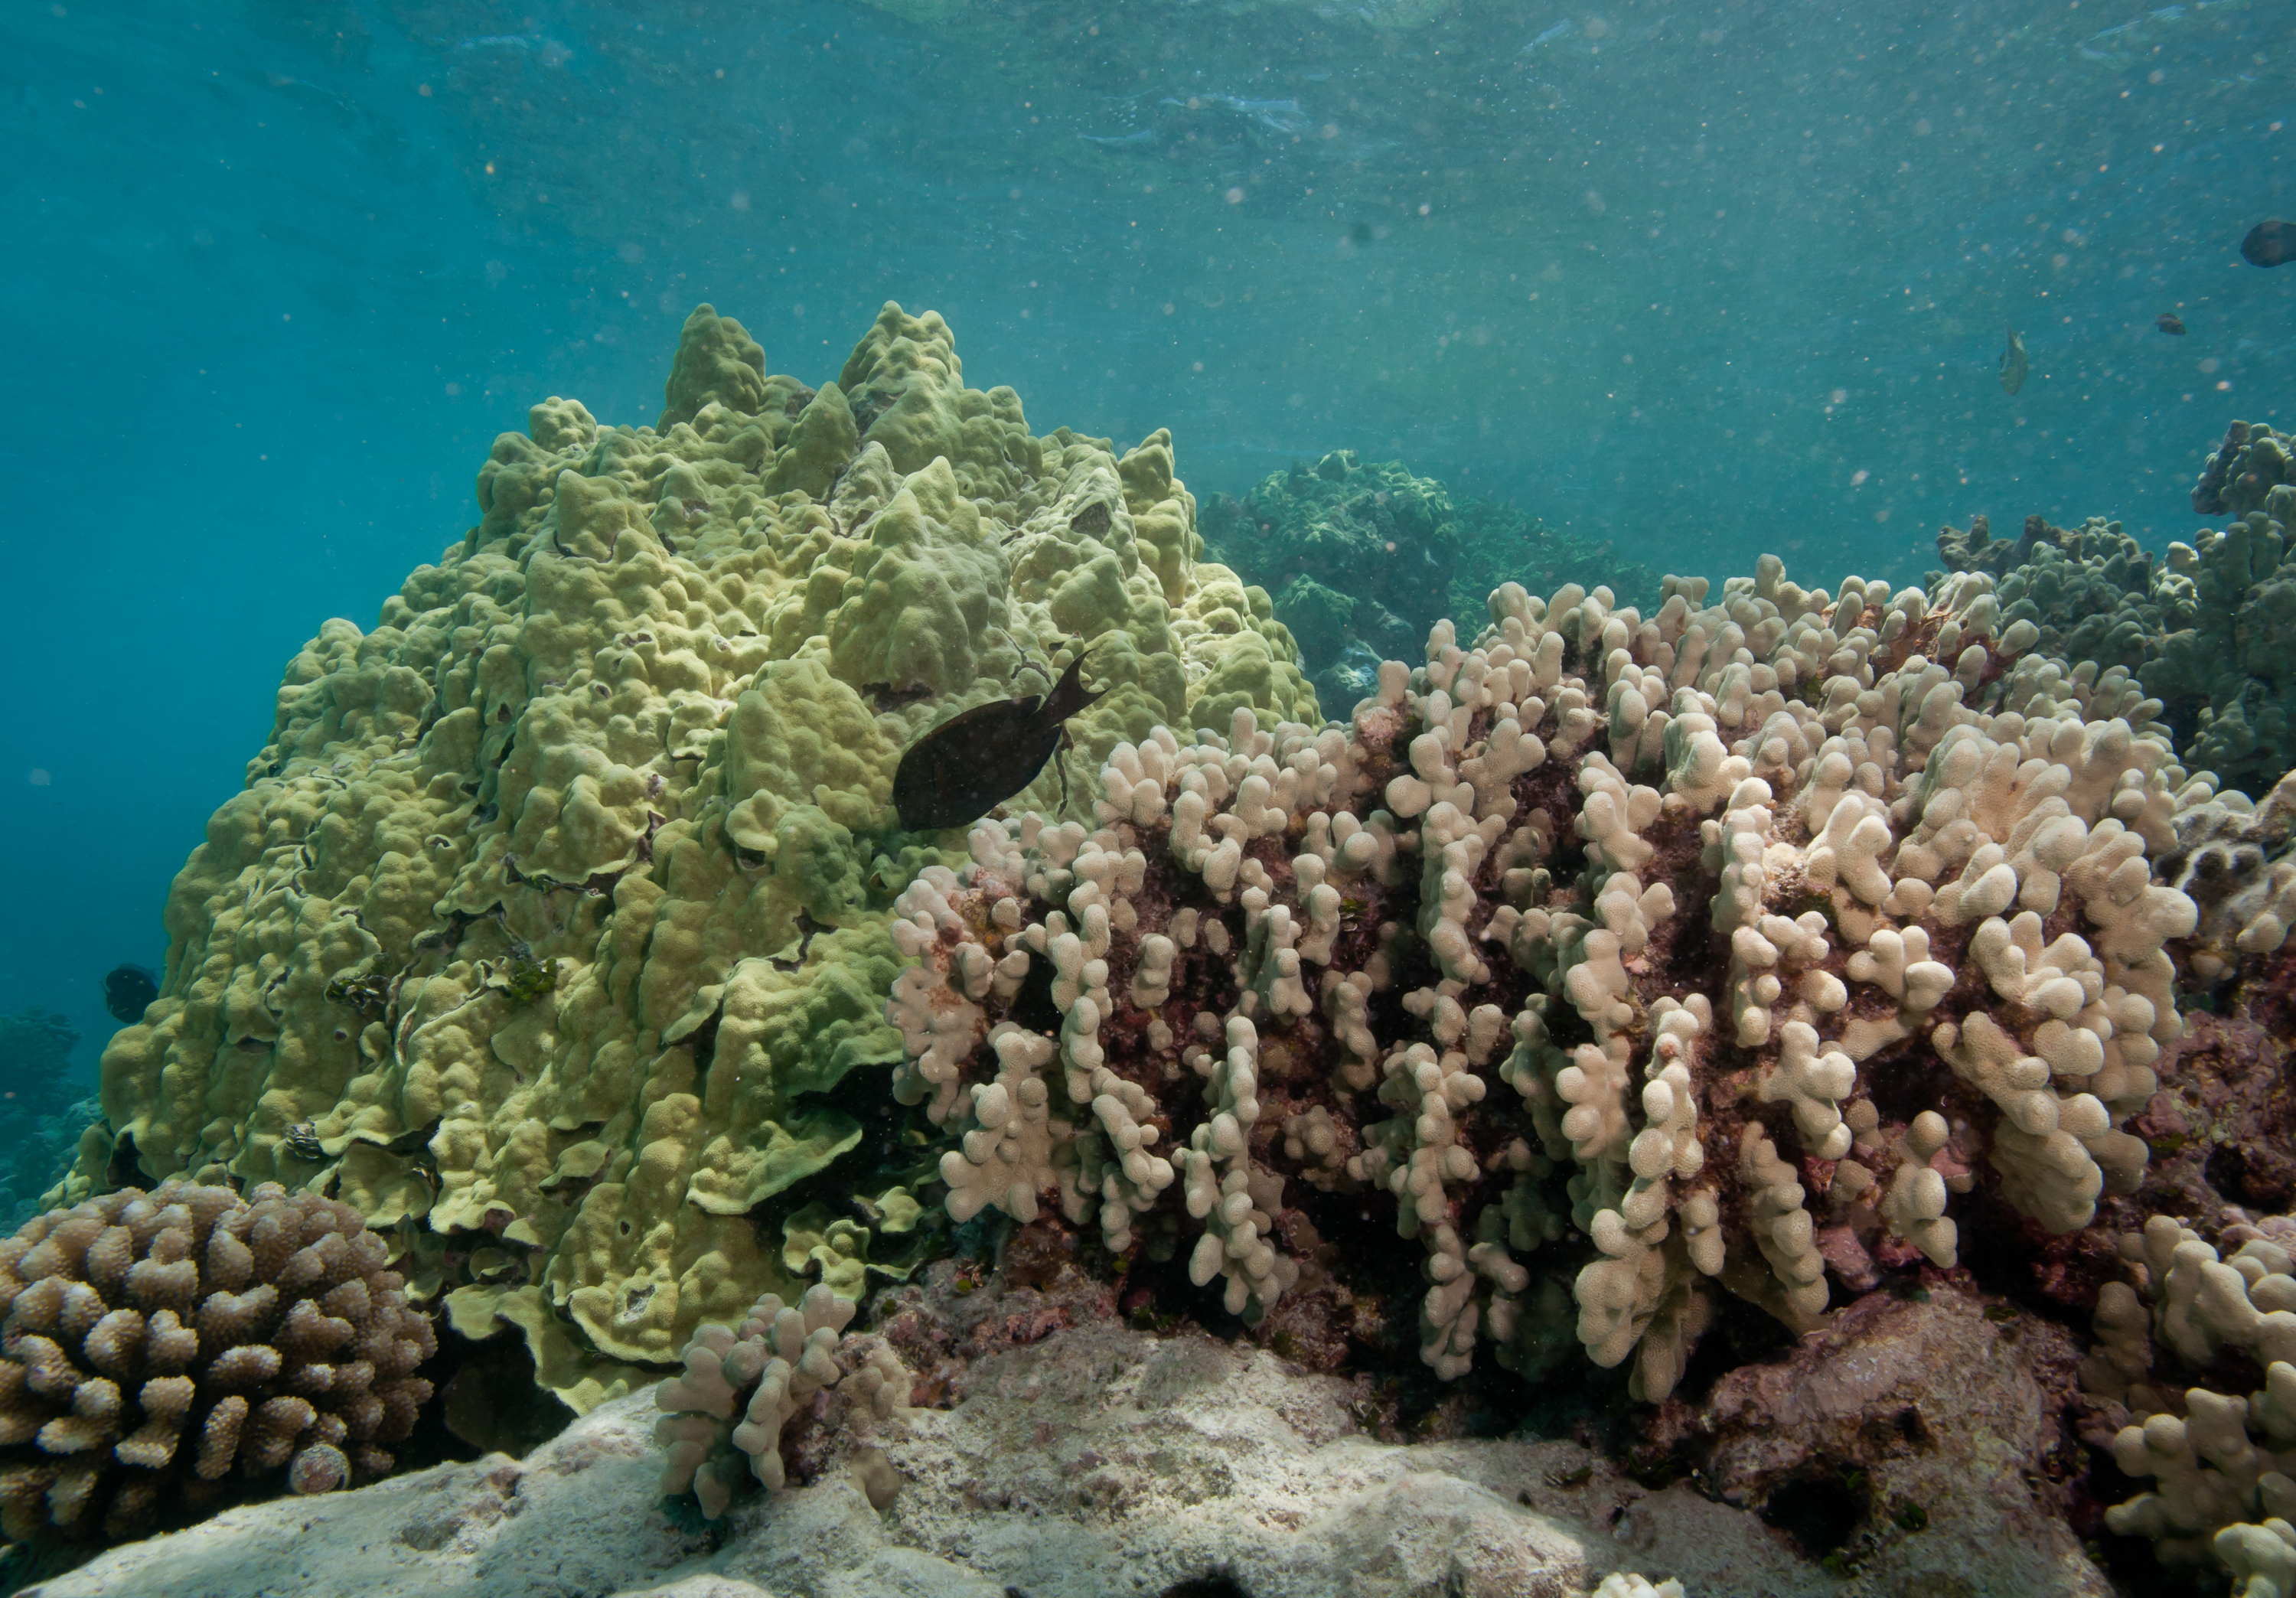 7: Coral Reefs and Diversity